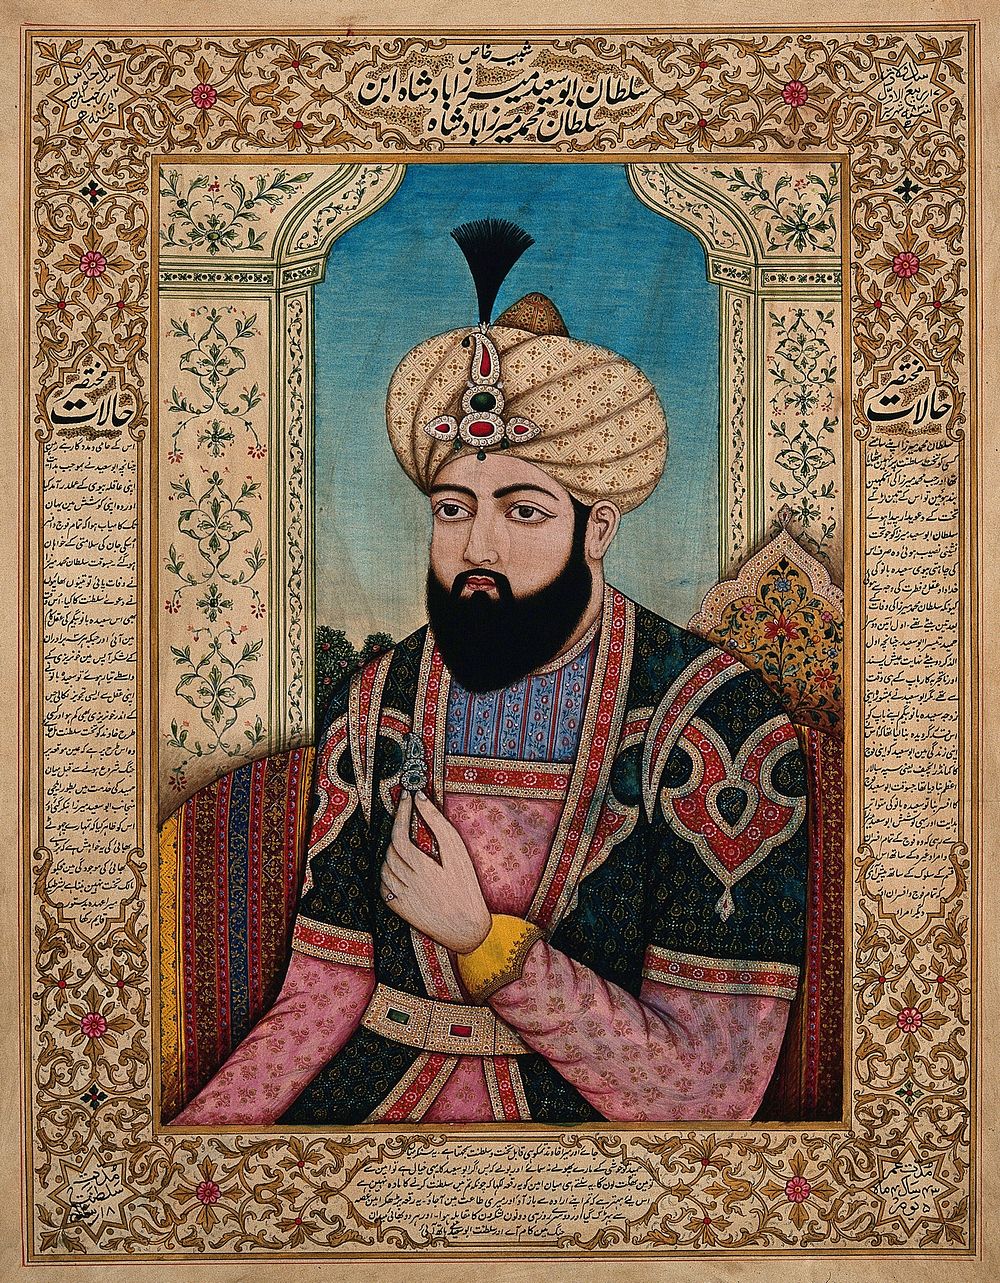 A member of the Mughal royal family holding a turban ornament. Gouache painting by an Indian painter.